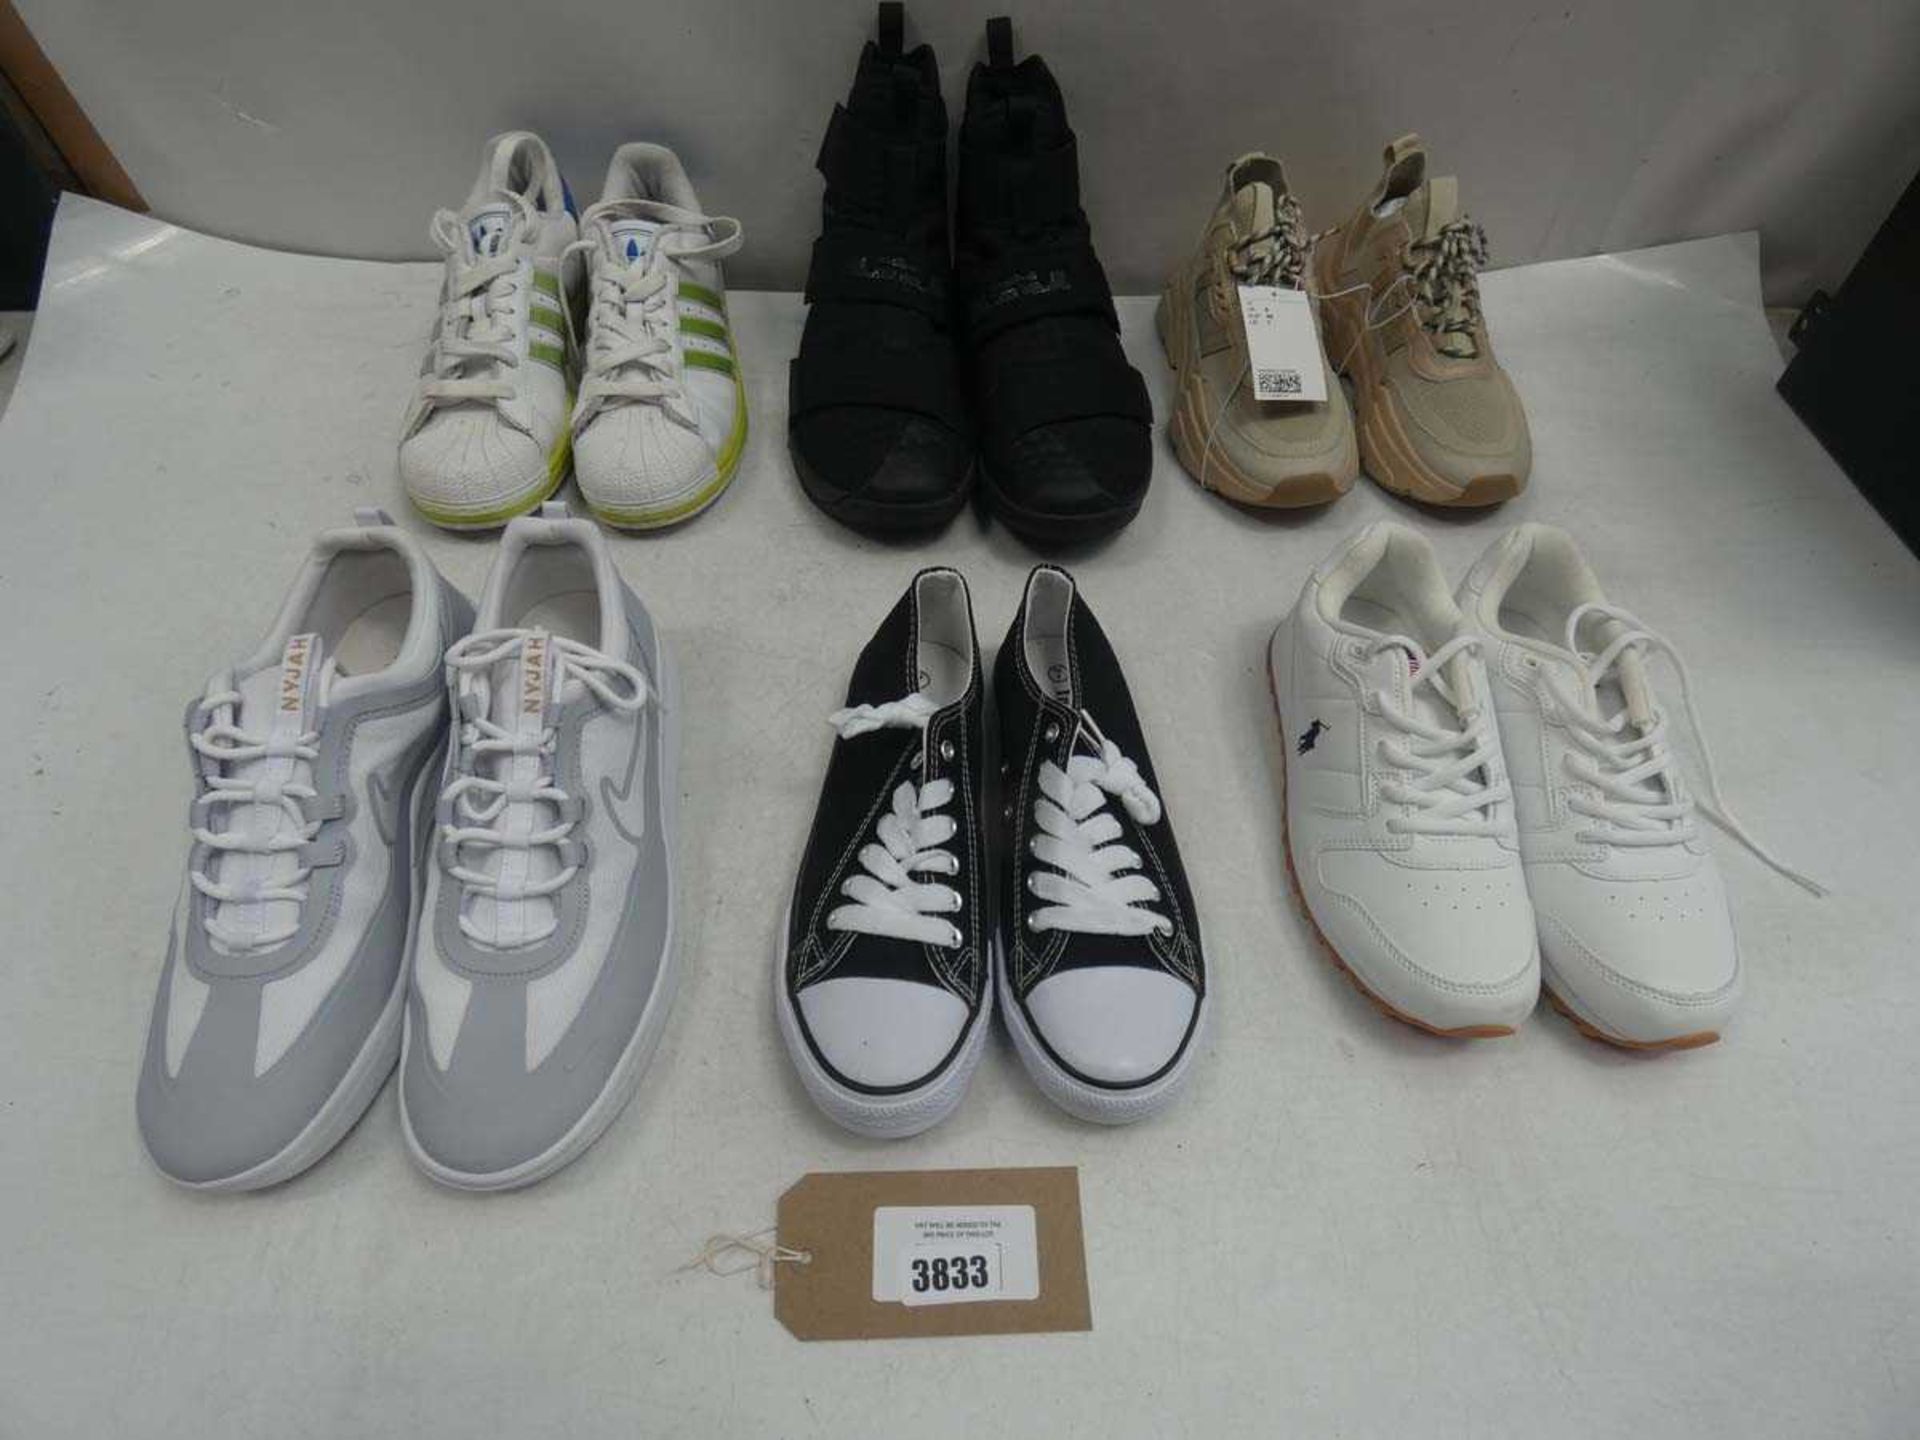 +VAT 6 Pairs of trainer shoes to include Adidas, Nike, Ralph Lauren, etc